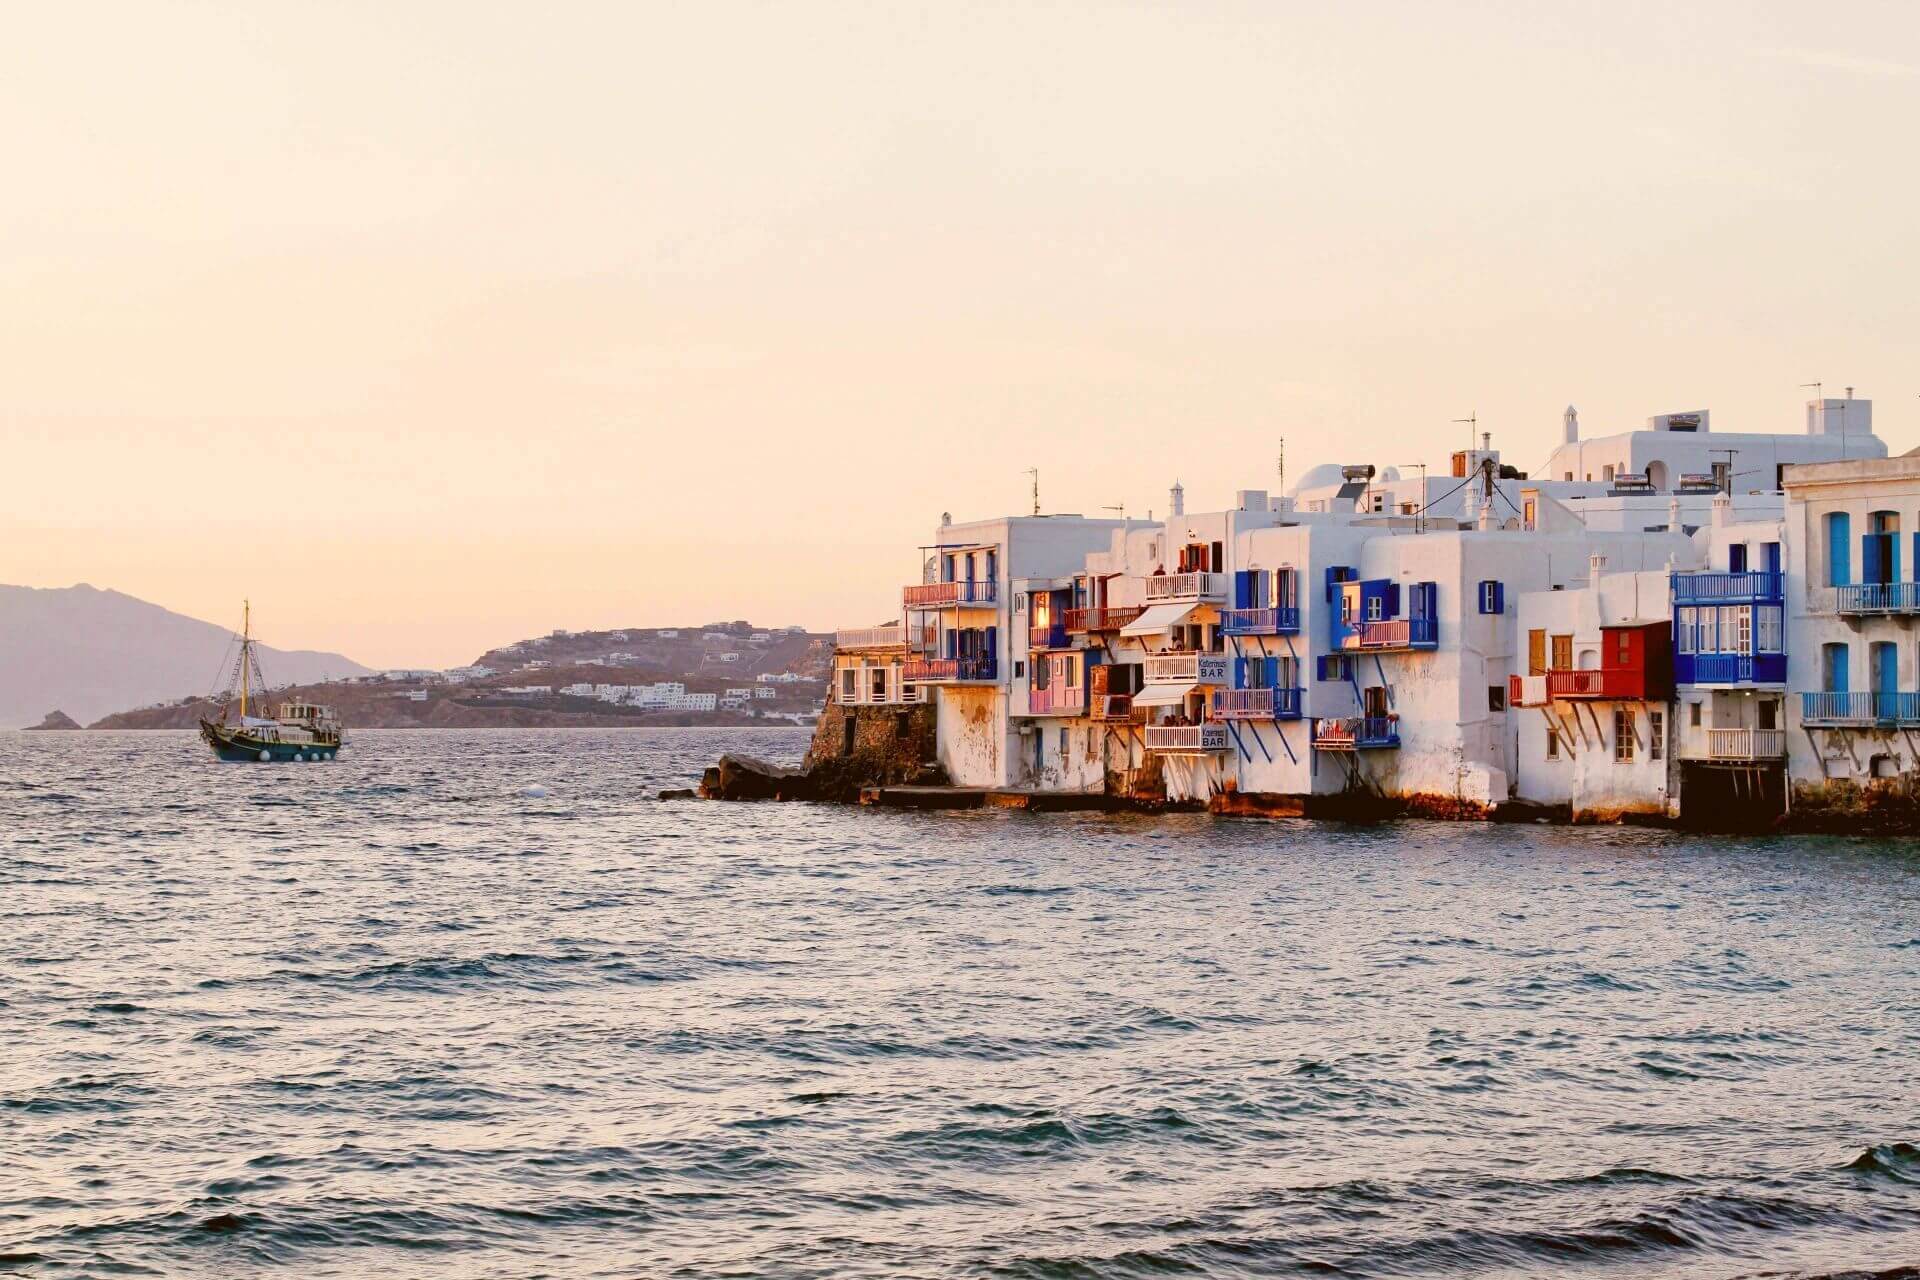 Little Venice in Chora, the town of Mykonos